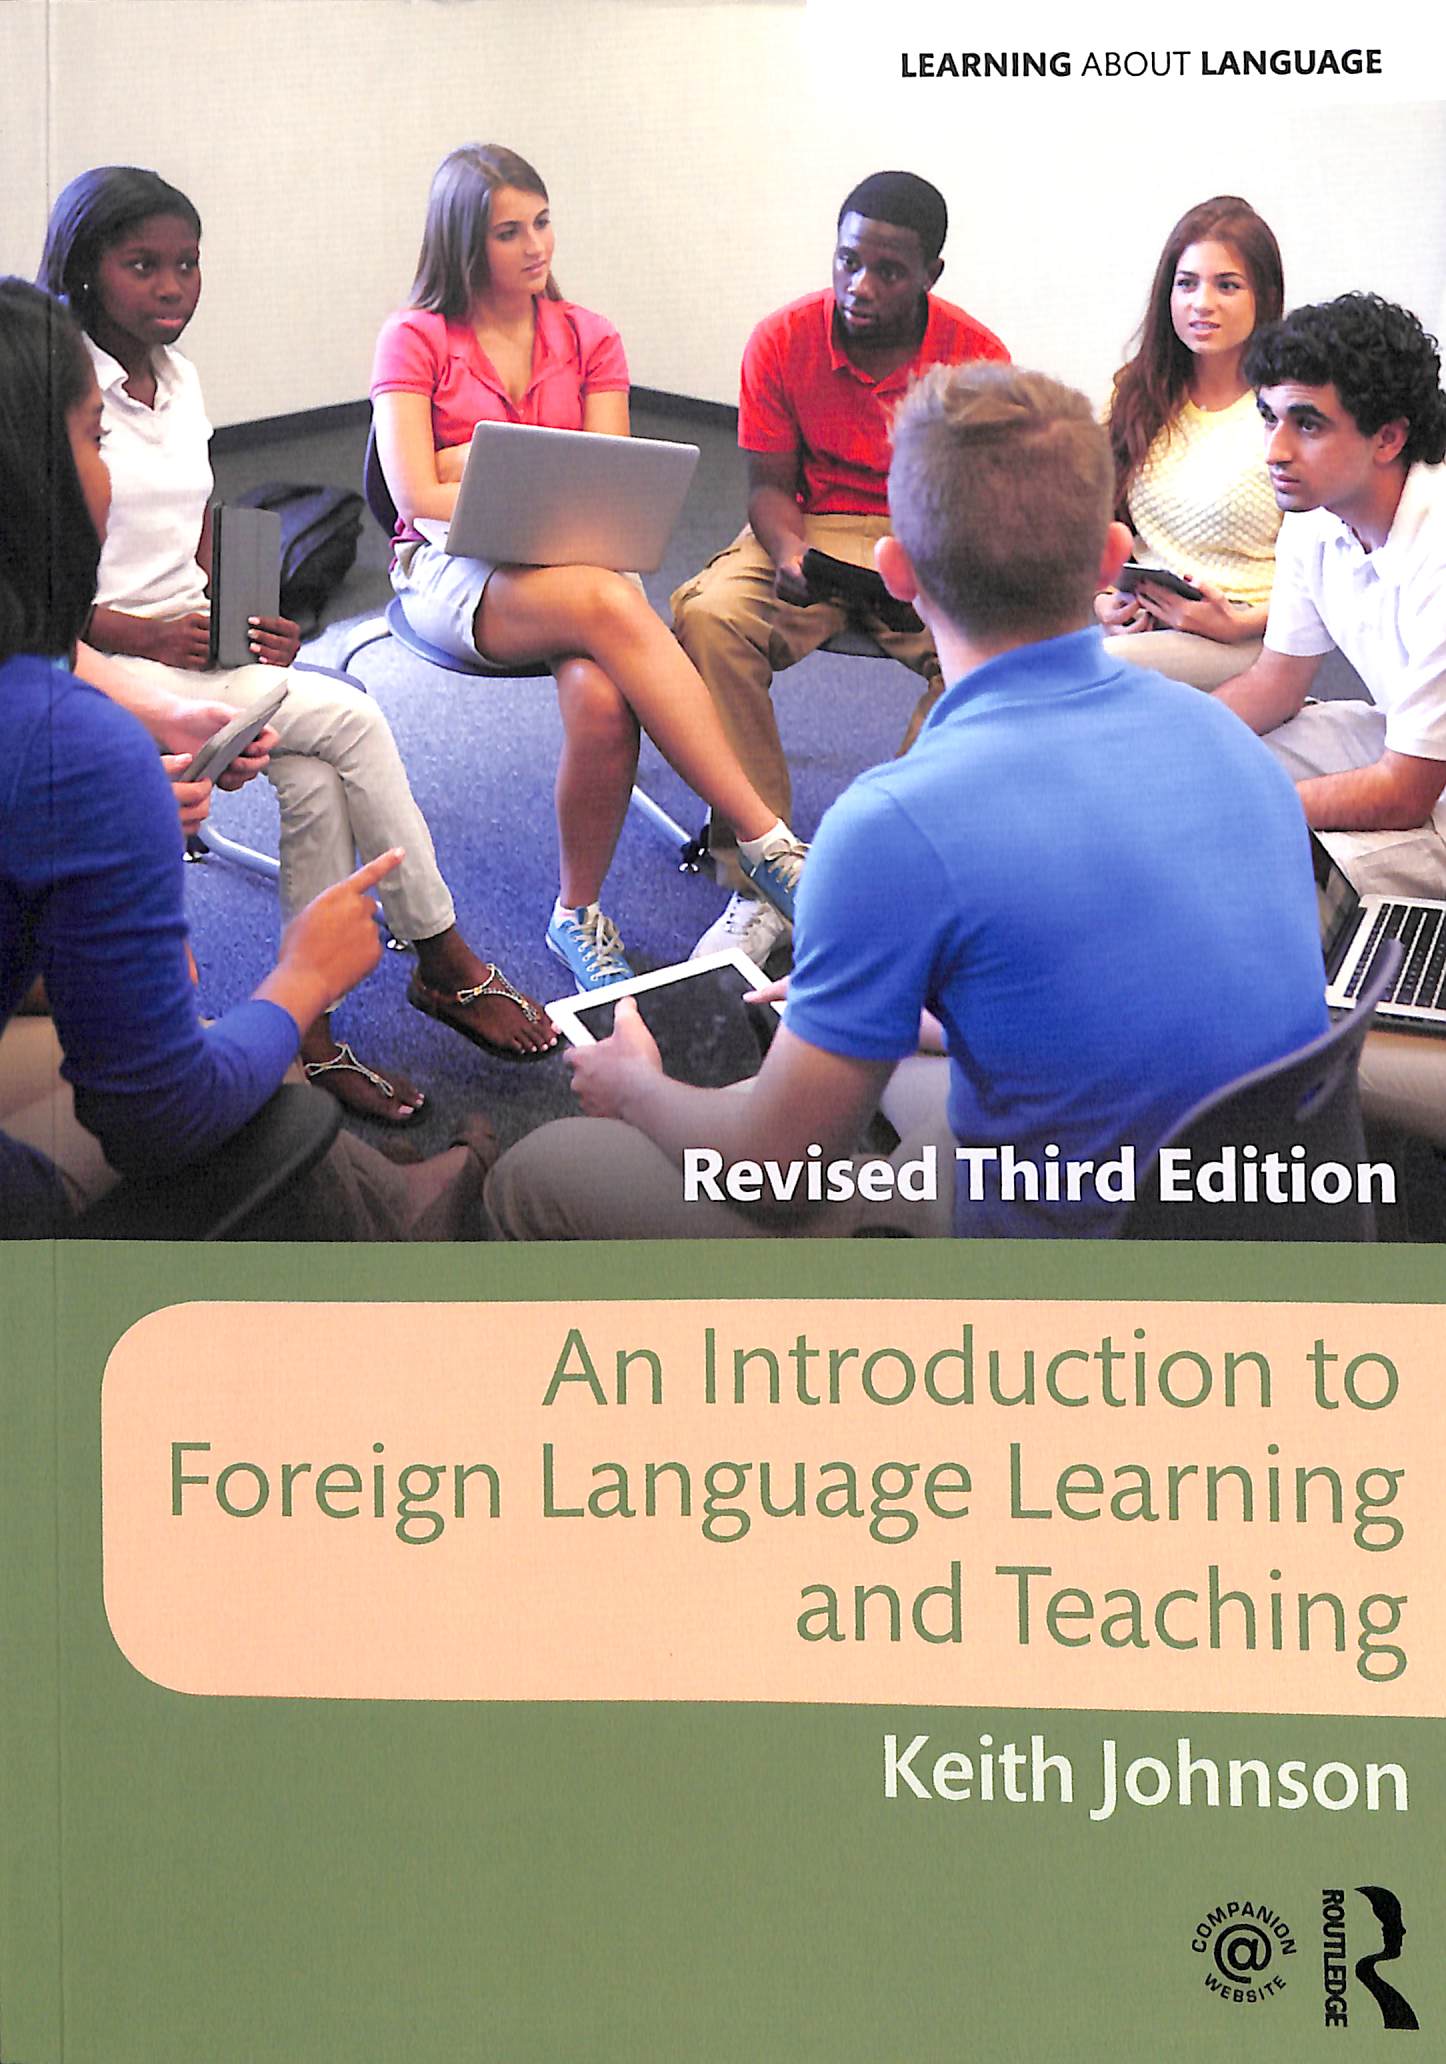 research on foreign language learning